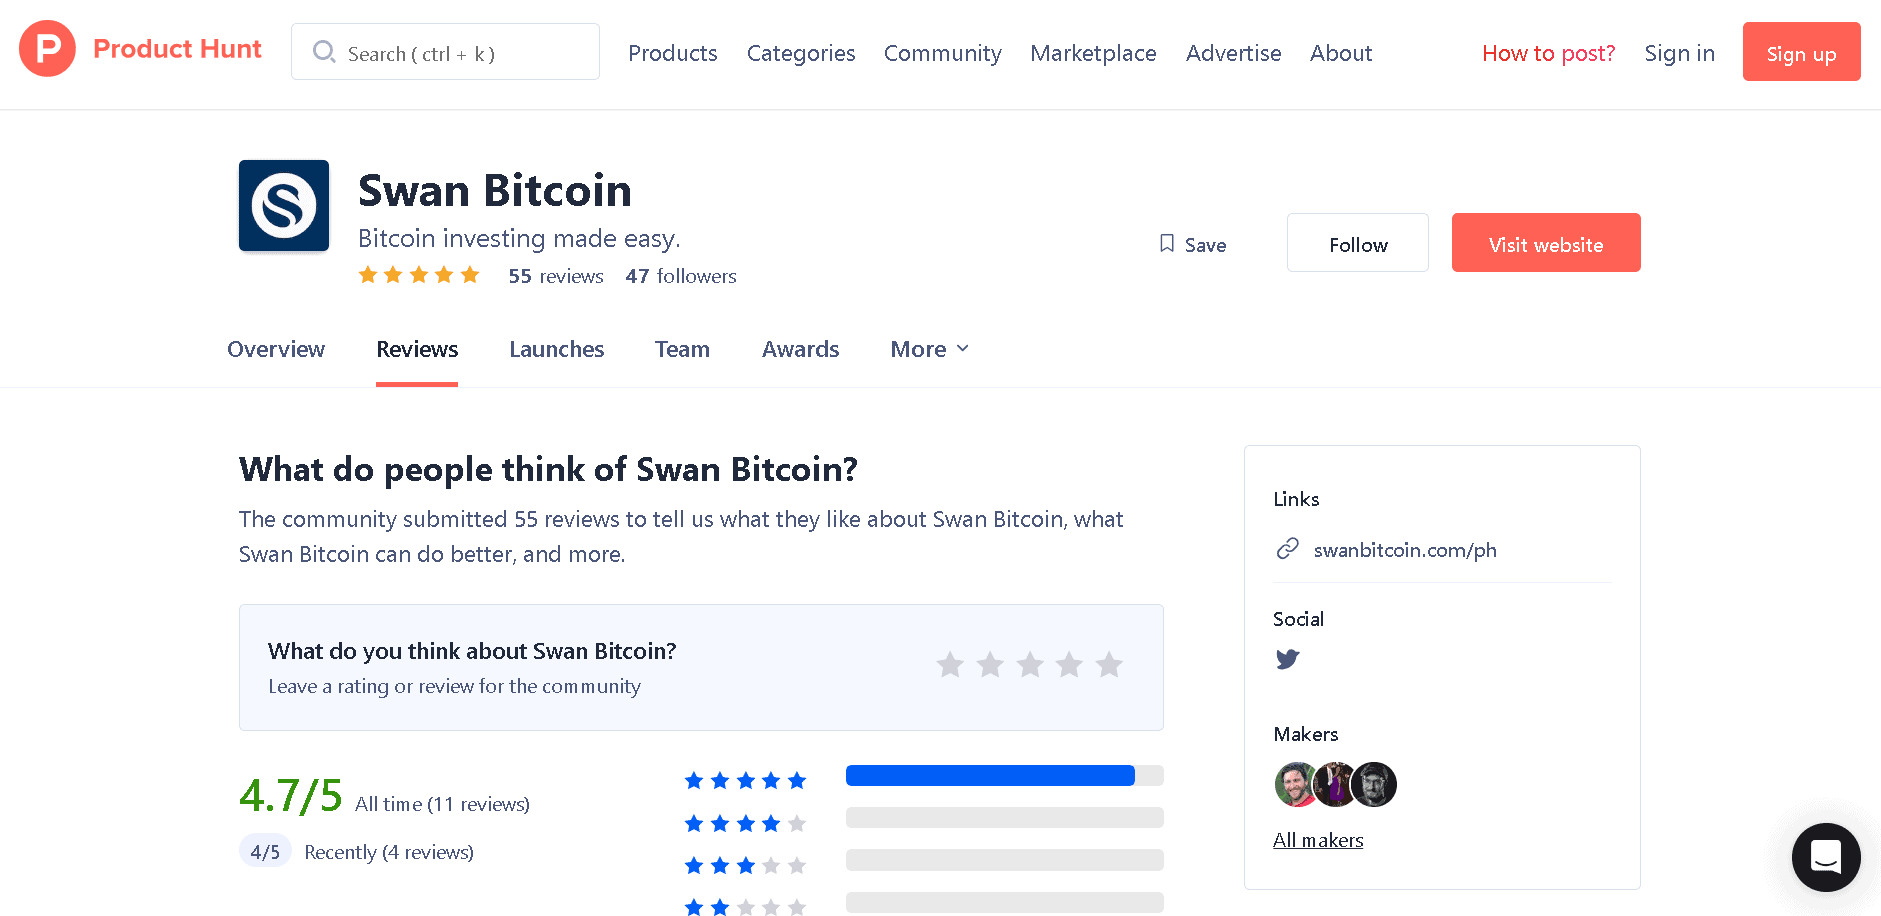 Swan Bticoin Product Hunt profile